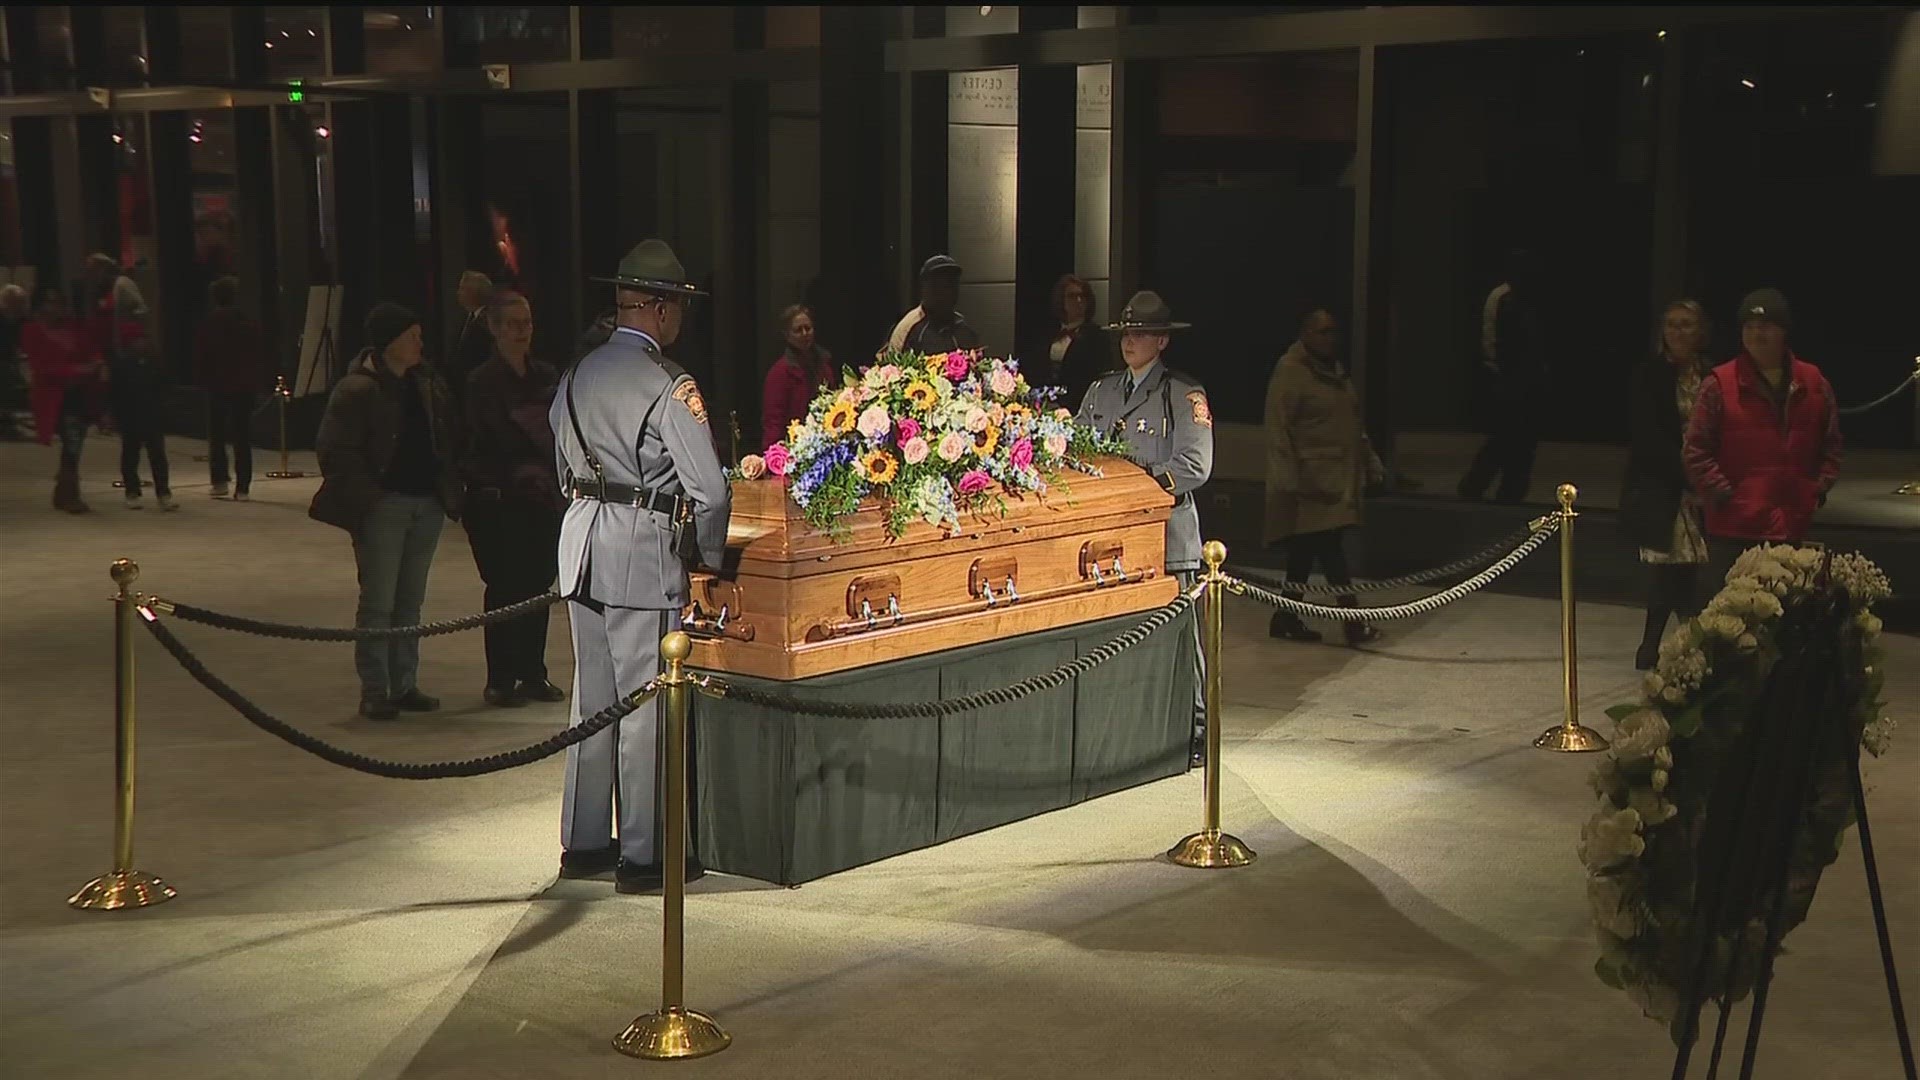 On Monday, the first of several observances took place to honor the life of former First Lady Rosalynn Carter.